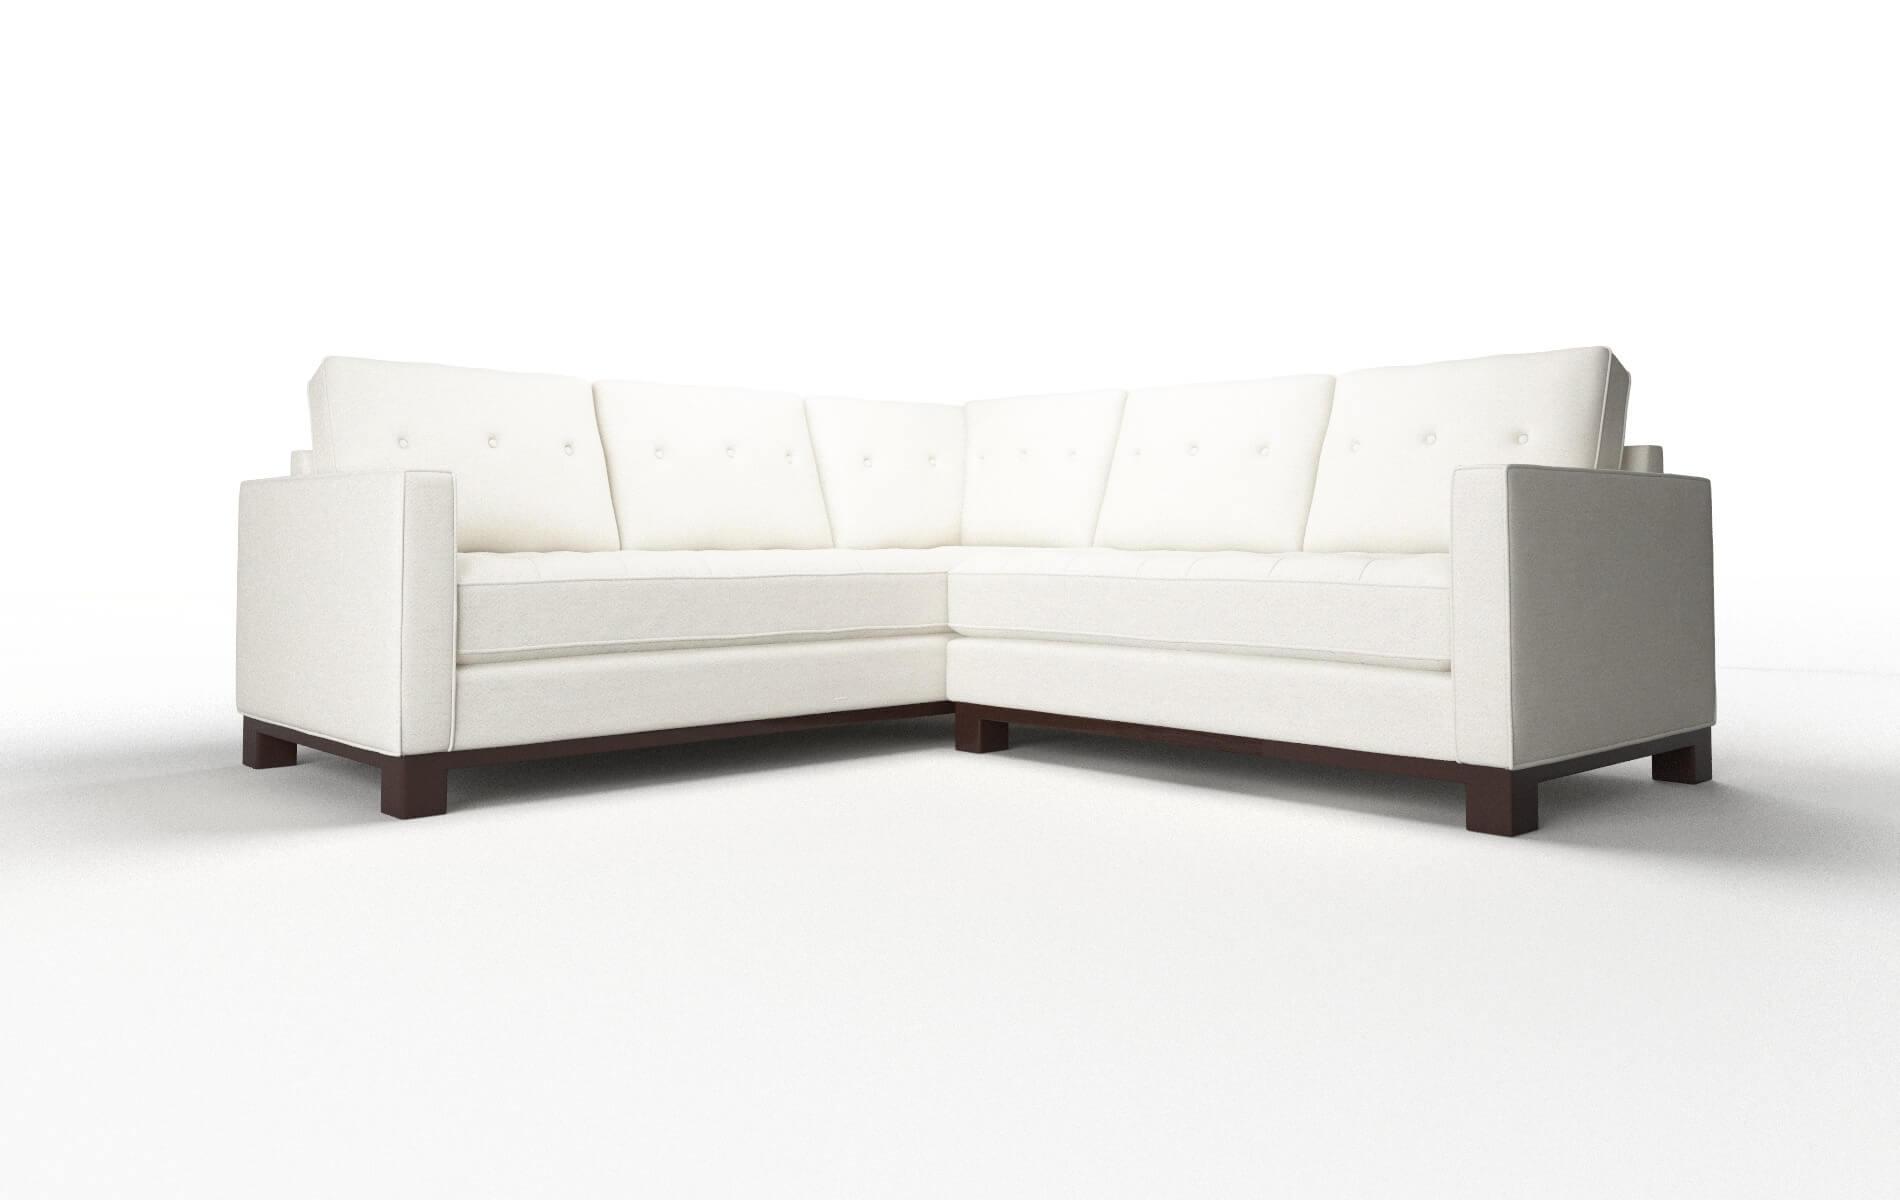 Syros Catalina Ivory Sectional espresso legs